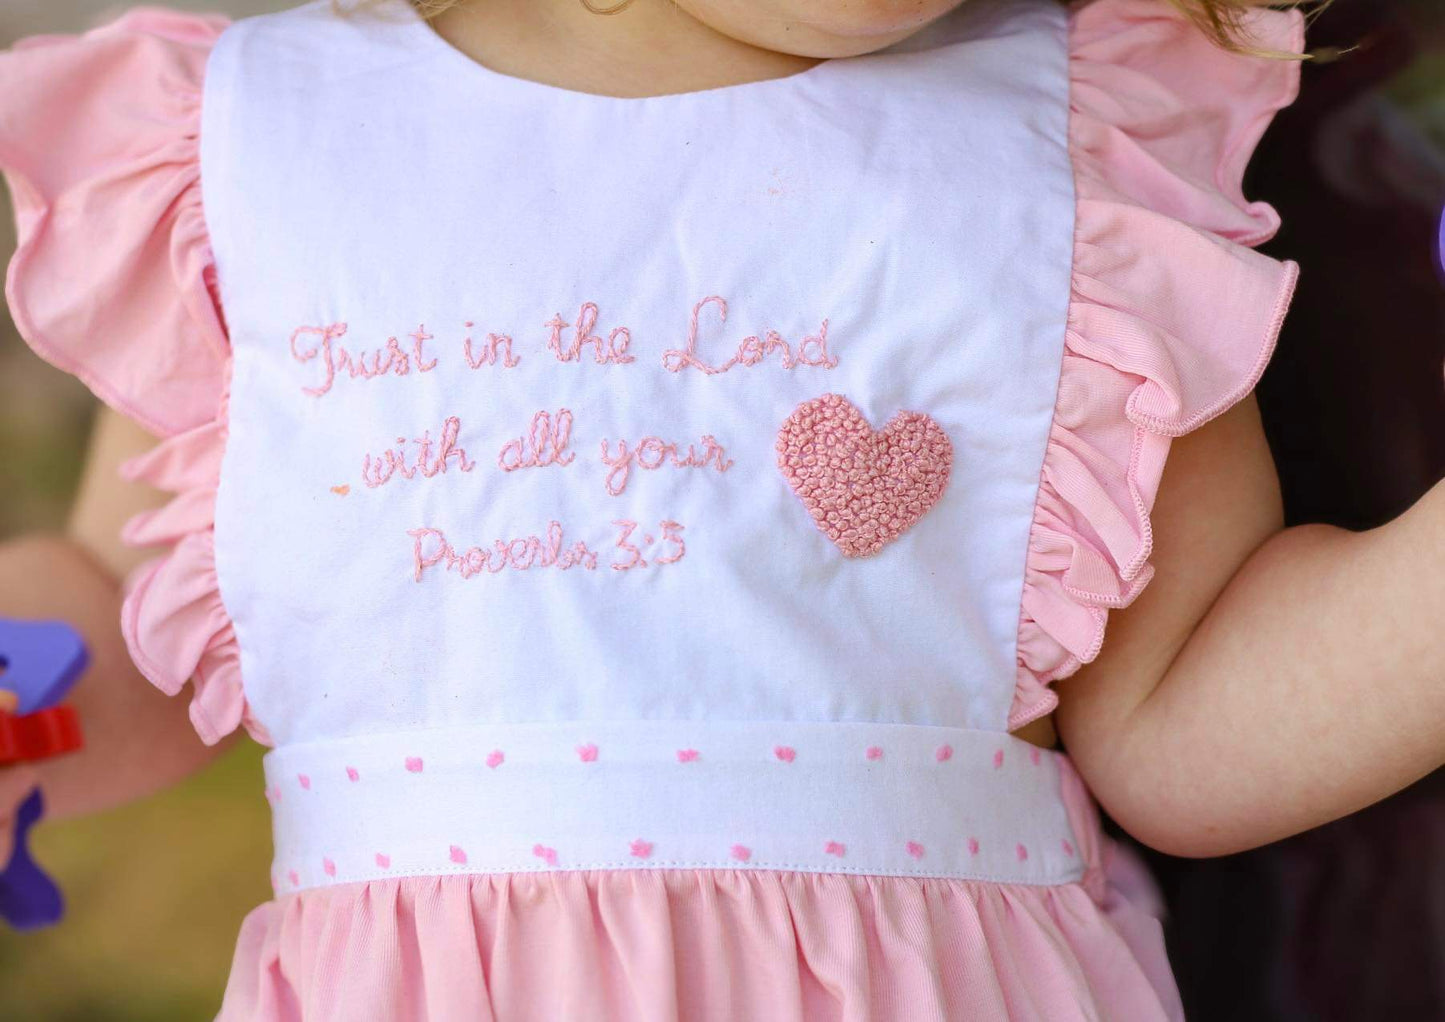 Girl’s Trust in the Lord with all your Heart Bubble